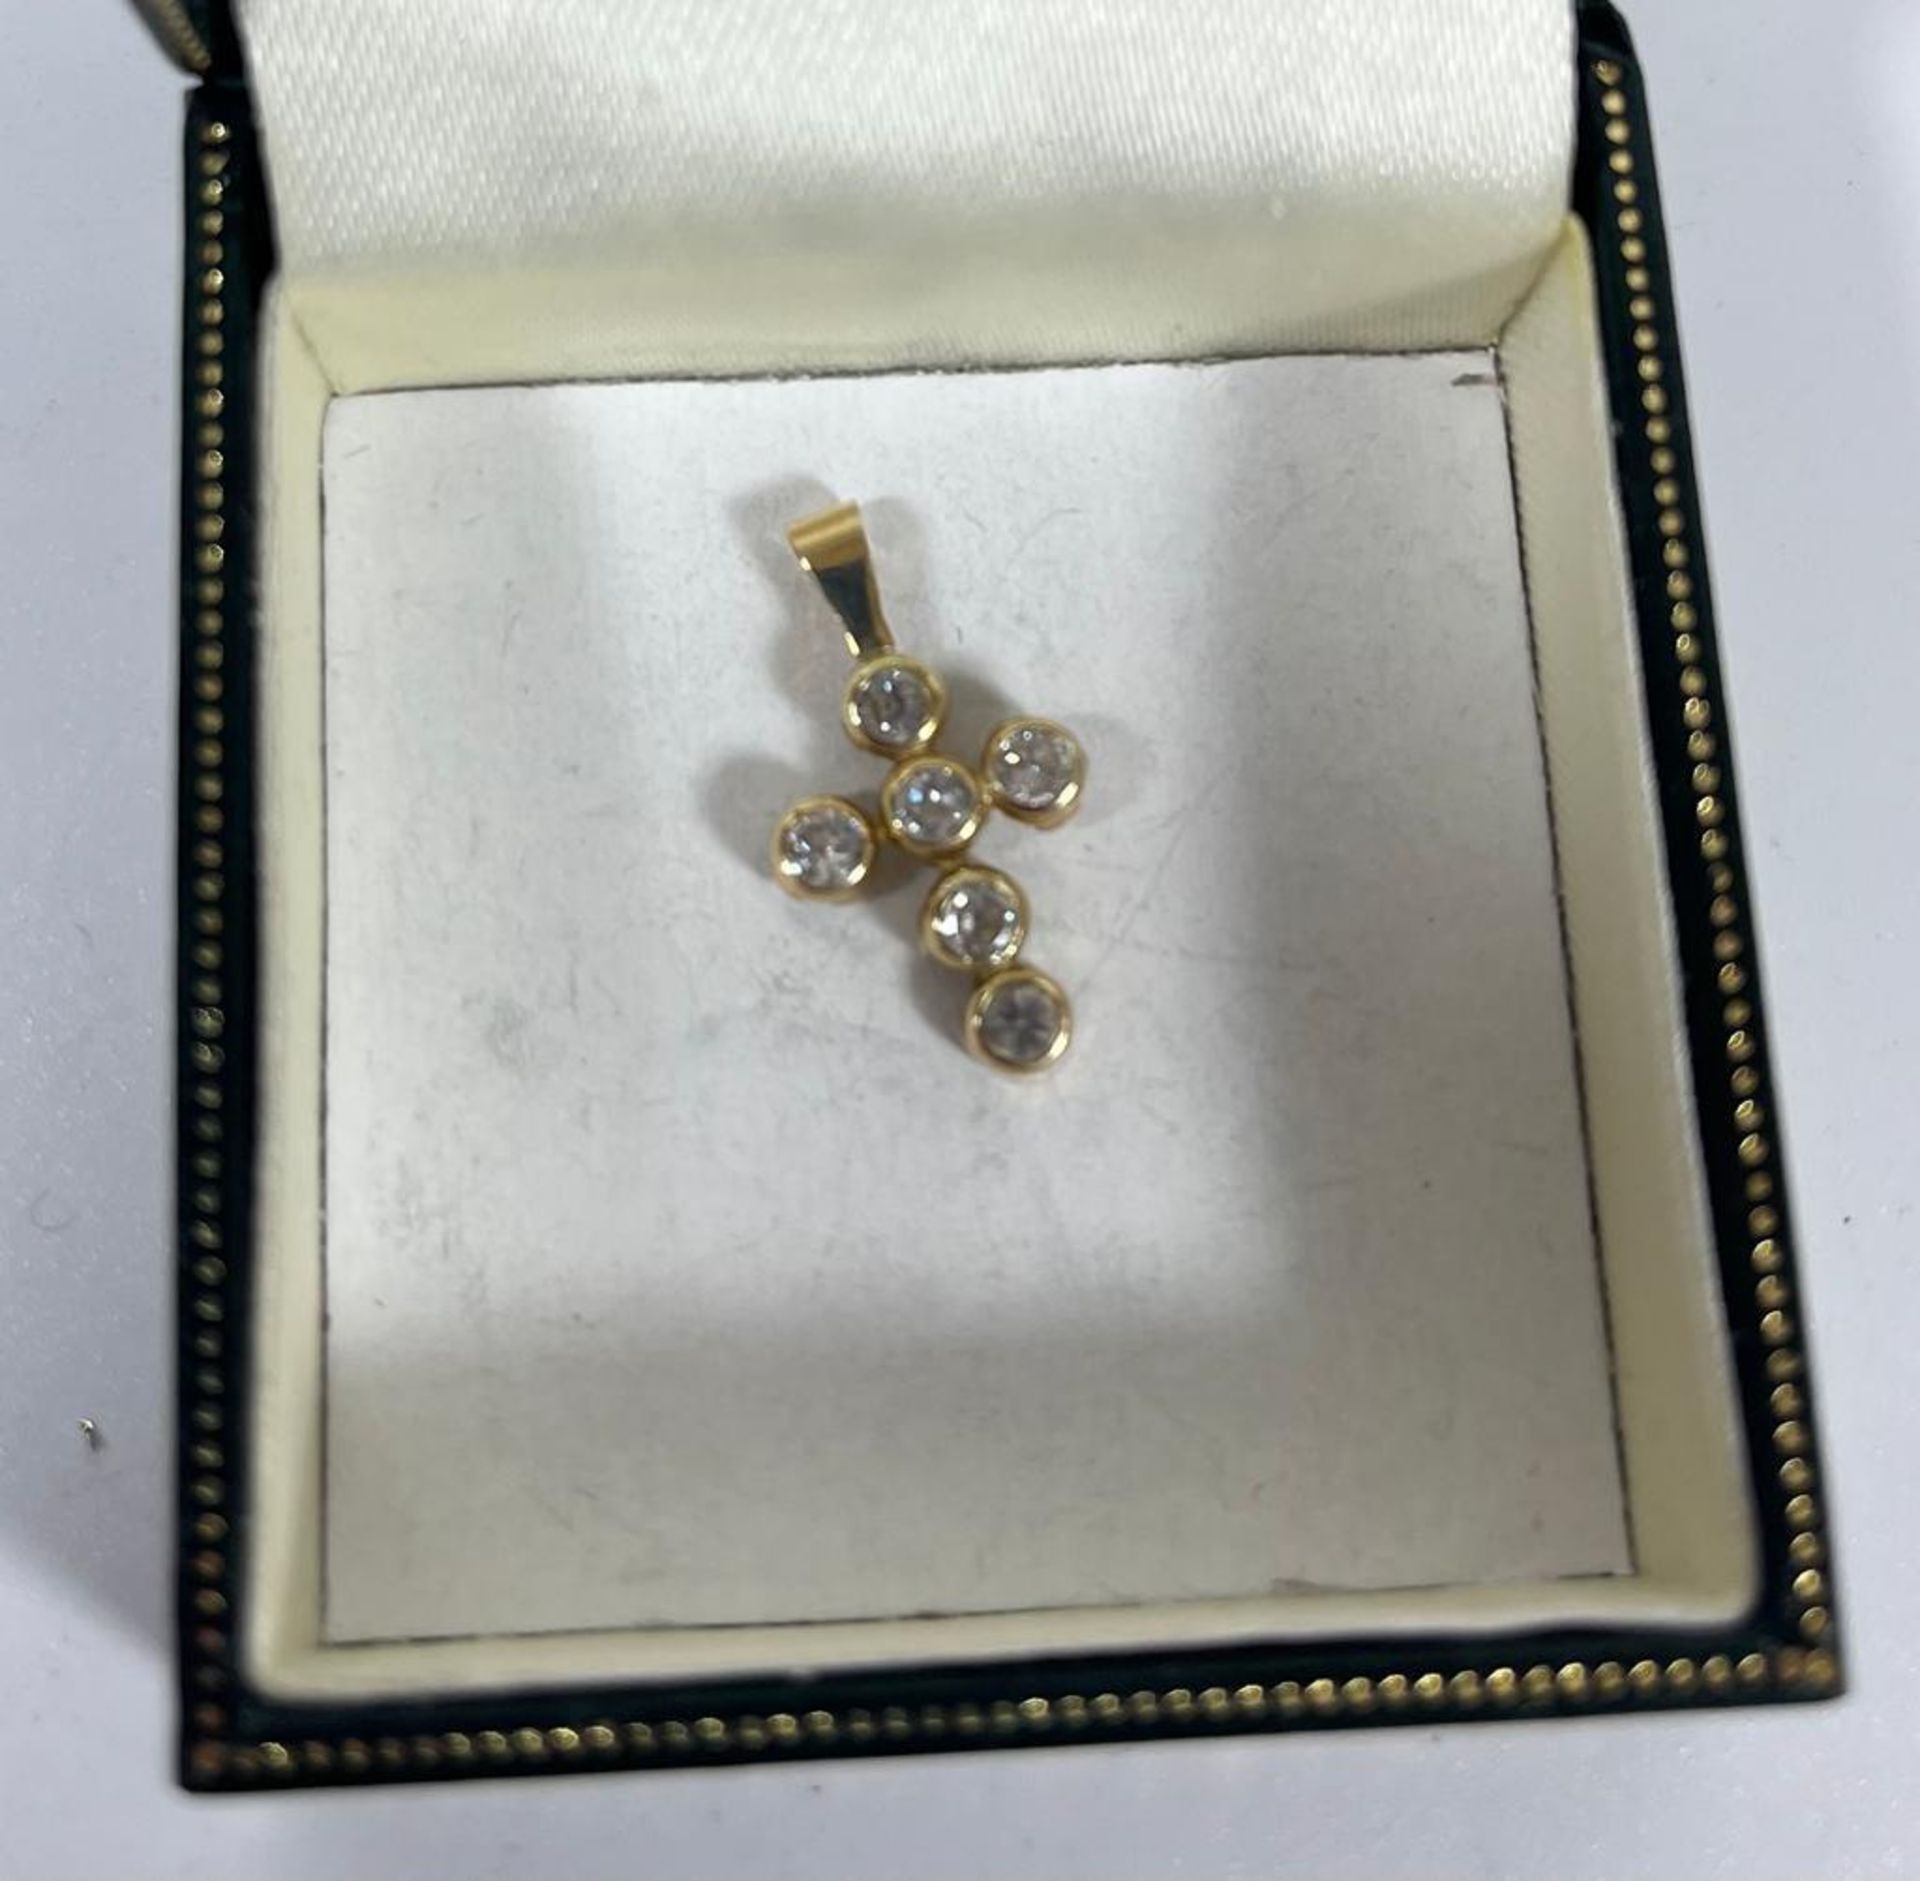 A 10CT YELLOW GOLD CRUCIFIX CROSS PENDANT WITH CLEAR STONES, WITH BOX - Image 2 of 3